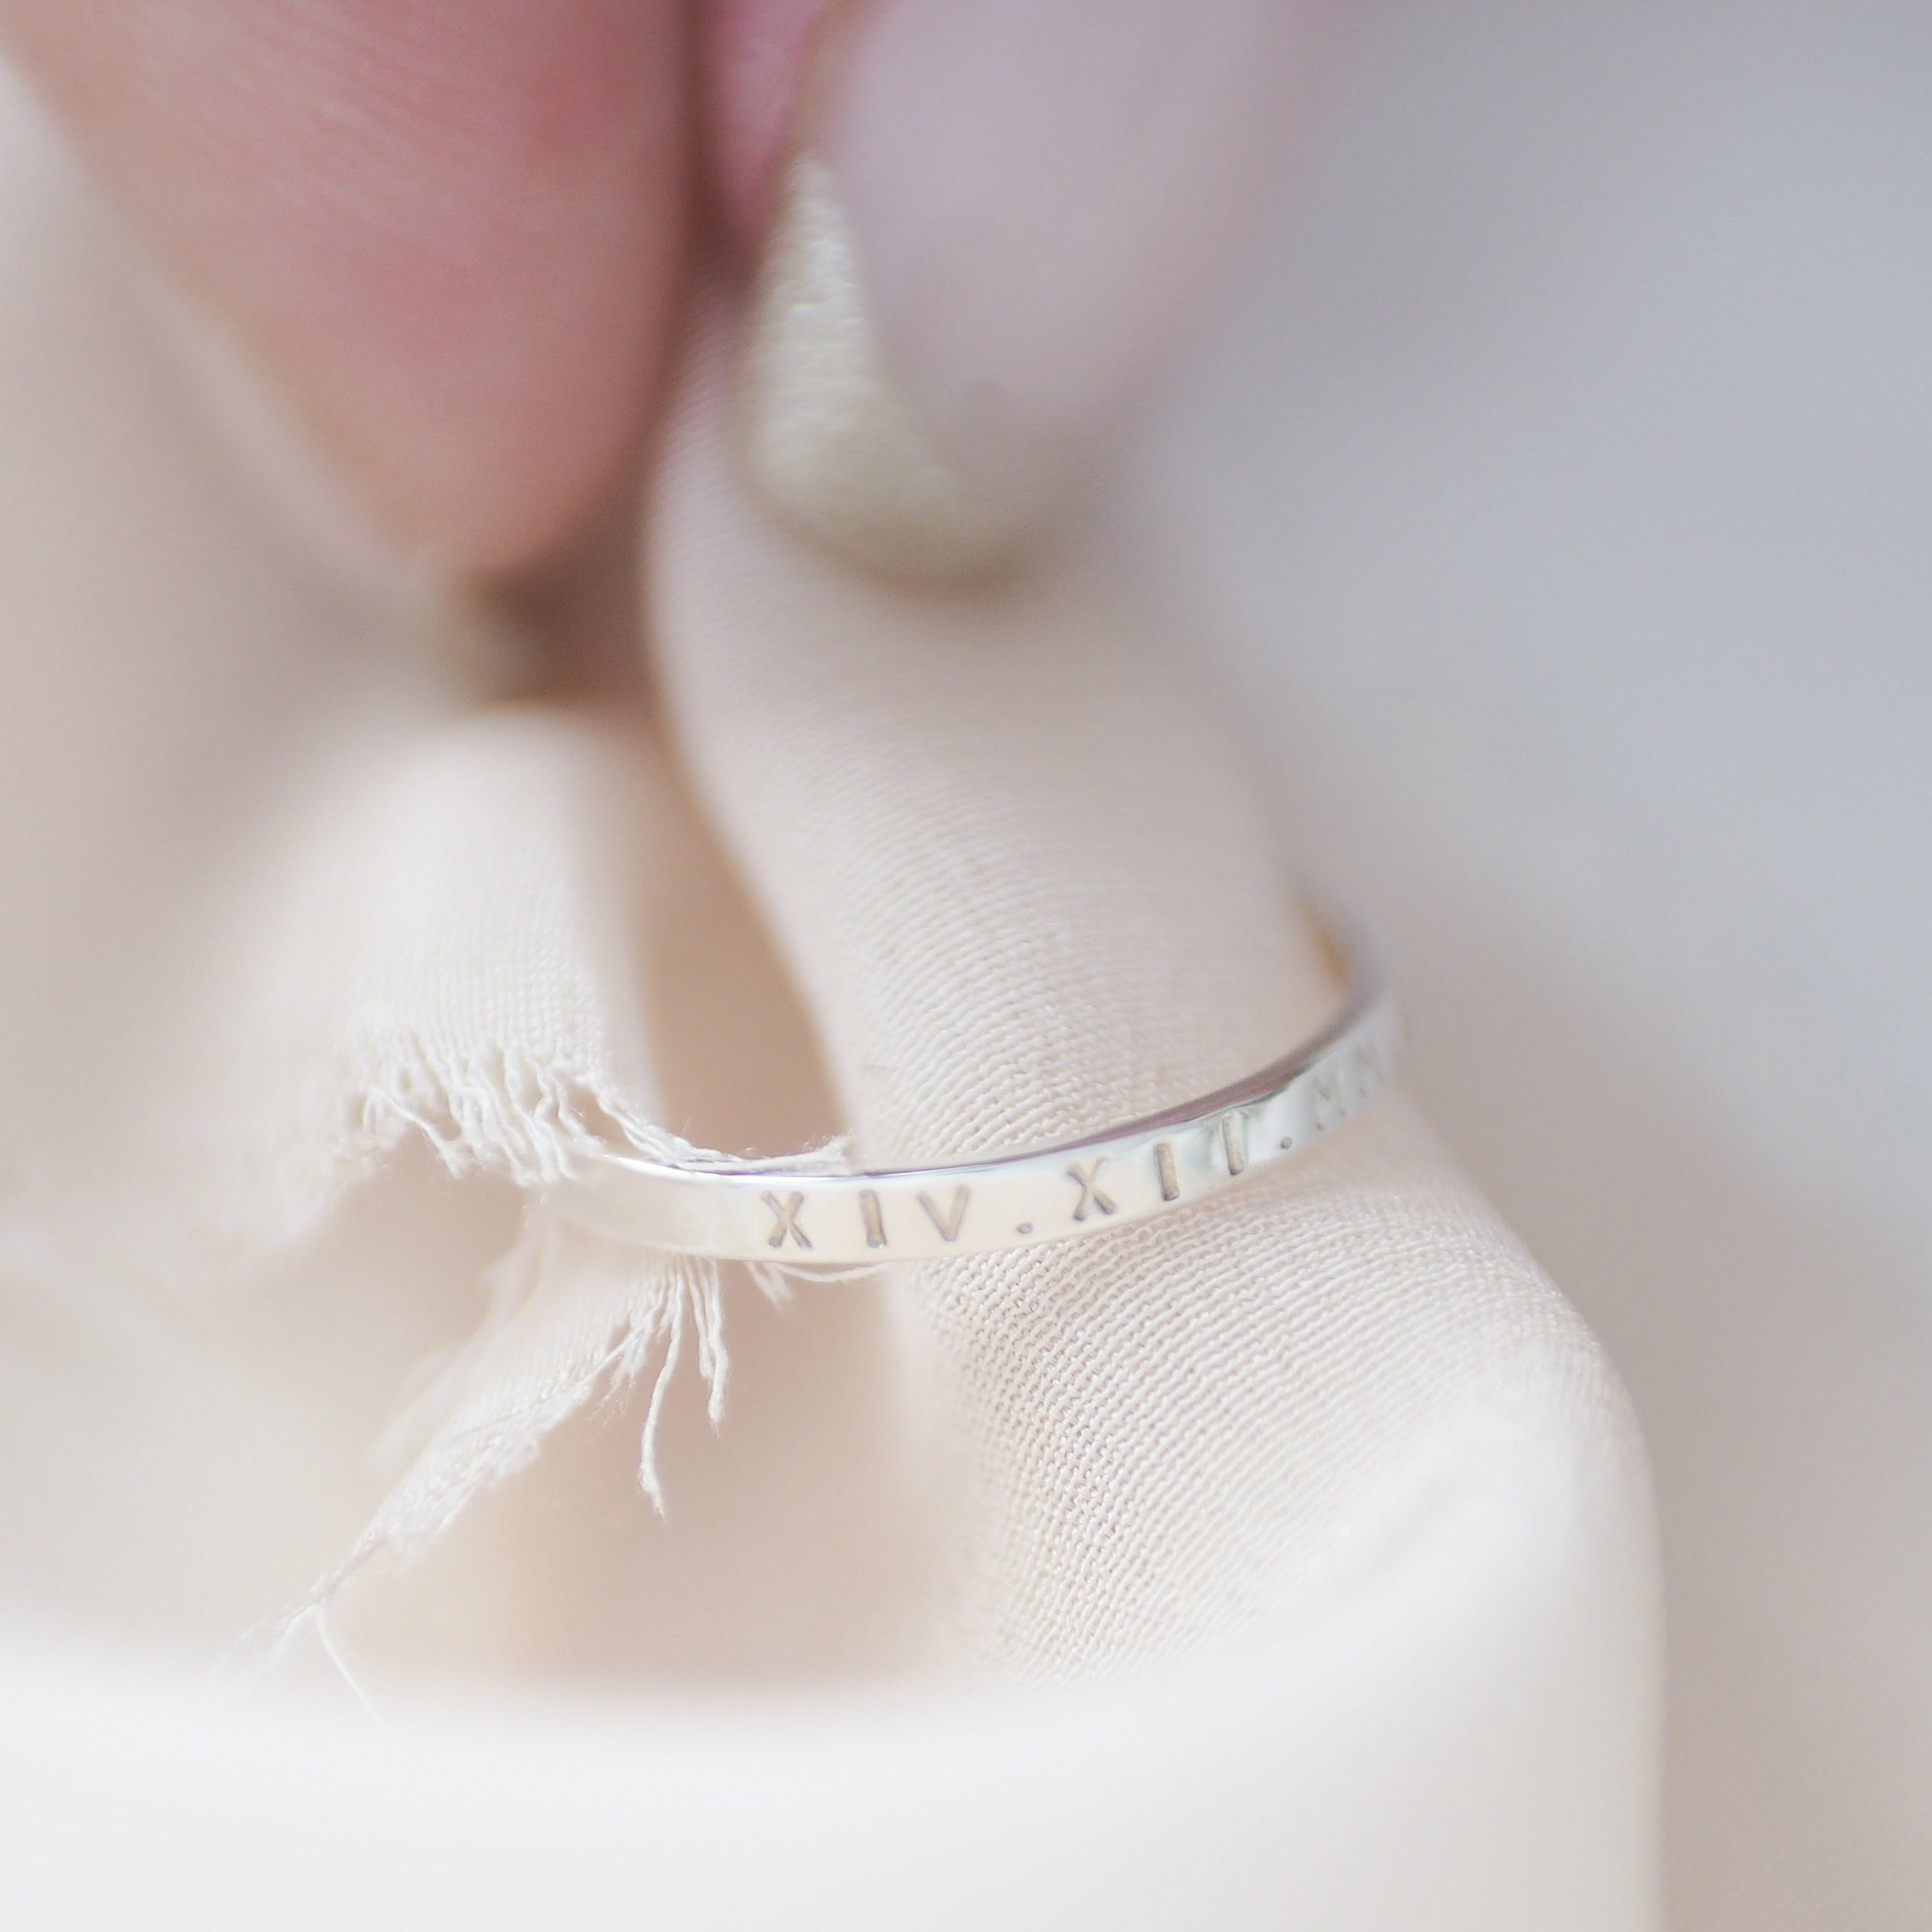 Slim Personalised Roman Numeral Stacking Ring in Sterling Silver